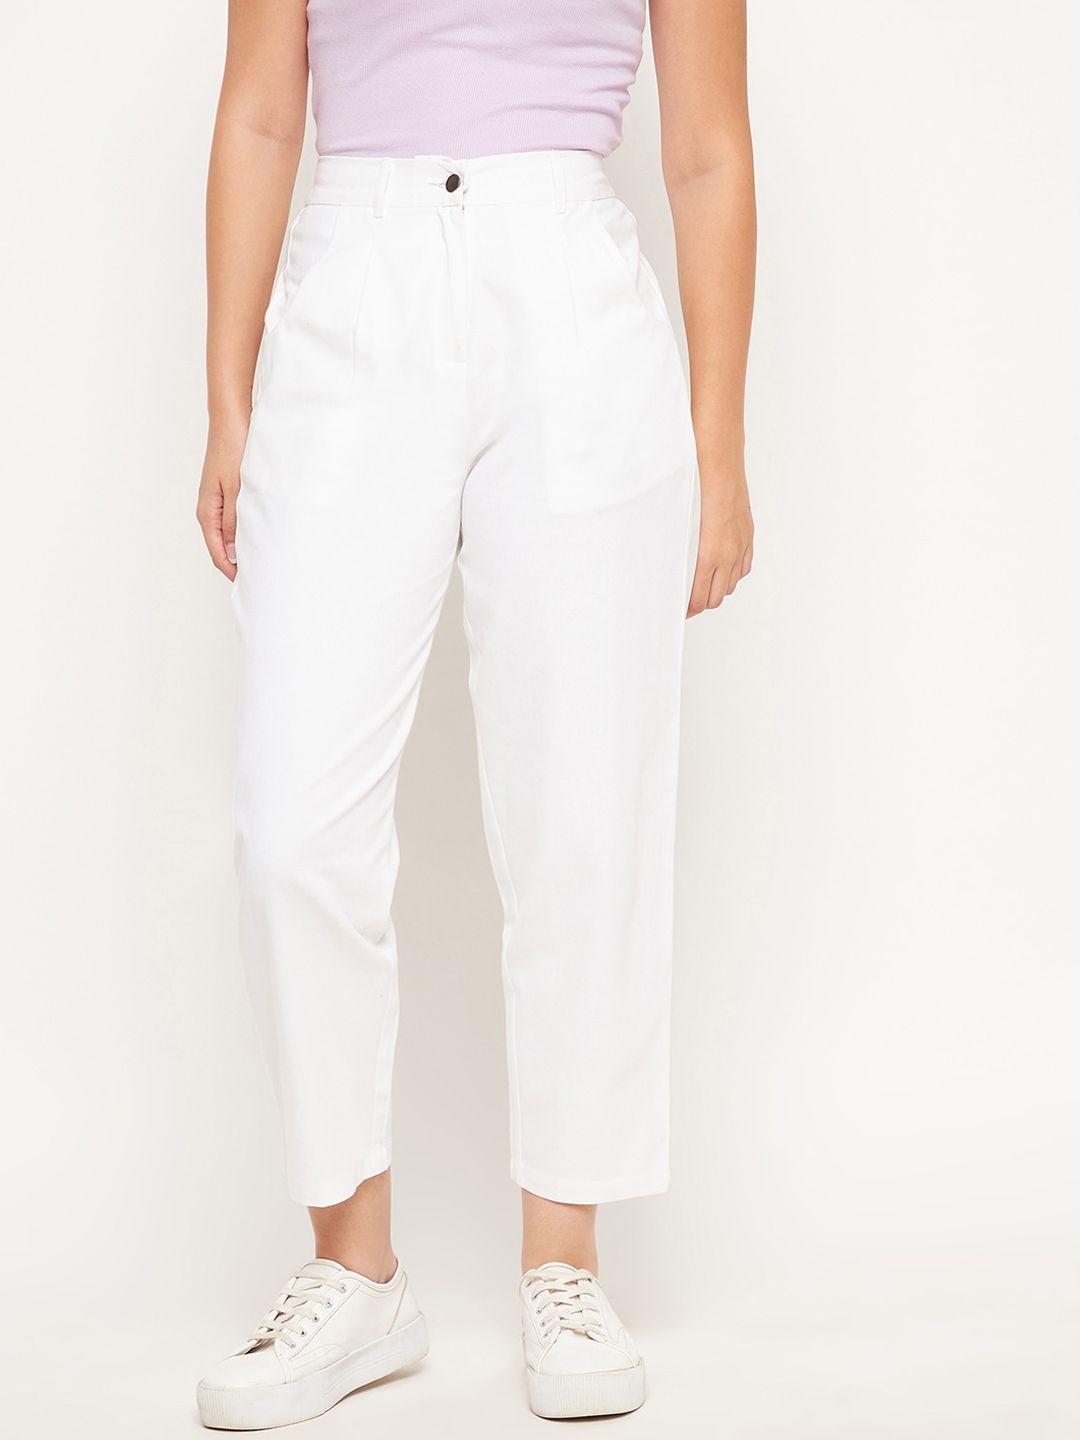 winered-women-white-solid-easy-wash-trousers